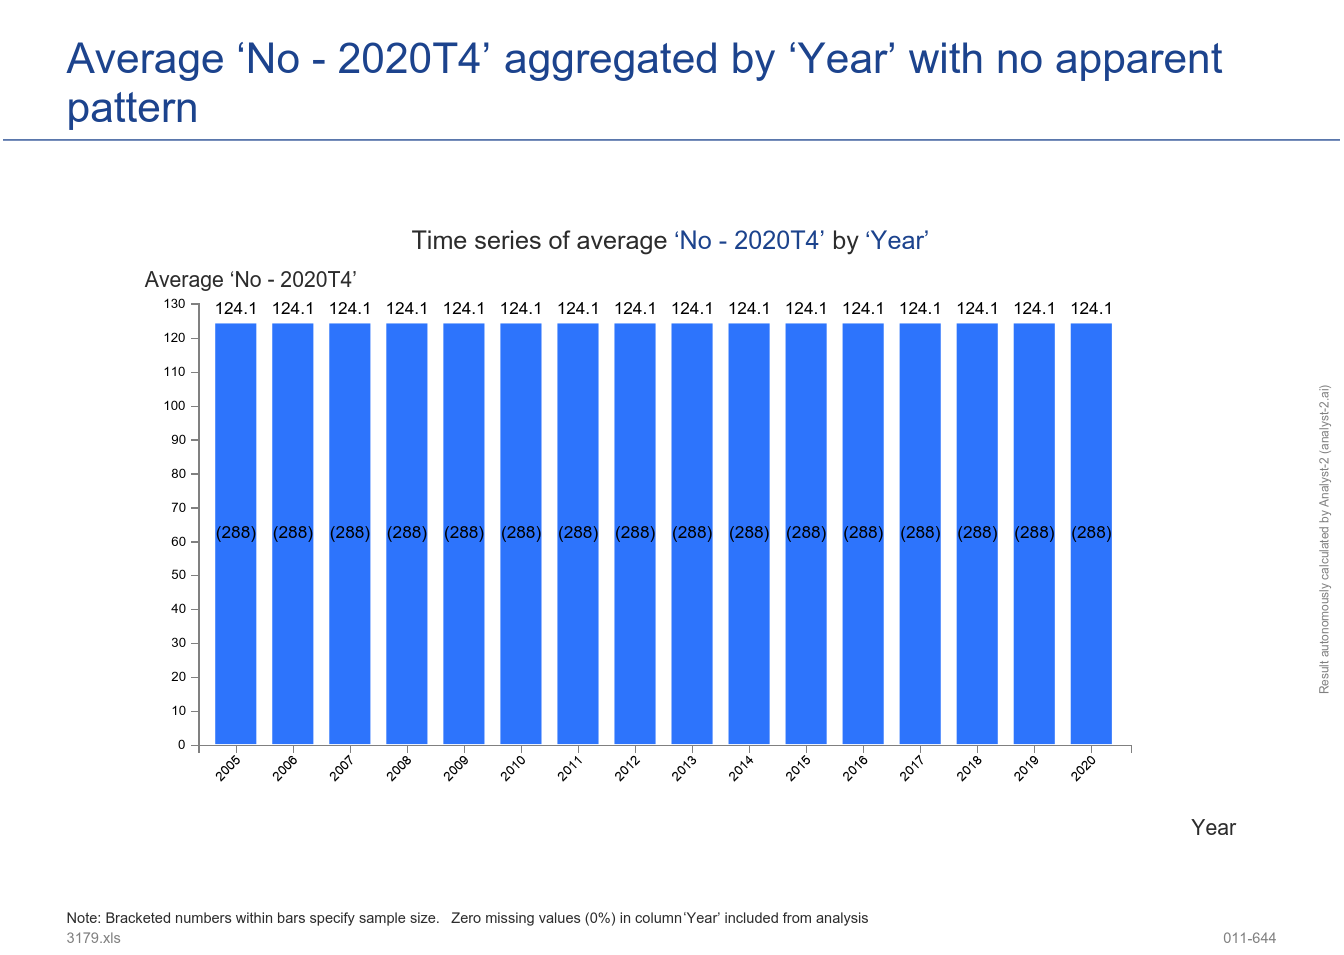 The average ‘No - 2020T4’ aggregated by ‘Year’ has no automatically discernible patterns. (Bankrupt debtors by existence of anticipated proposals of agreement. EPC (API identifier: 3179) - 011-644)